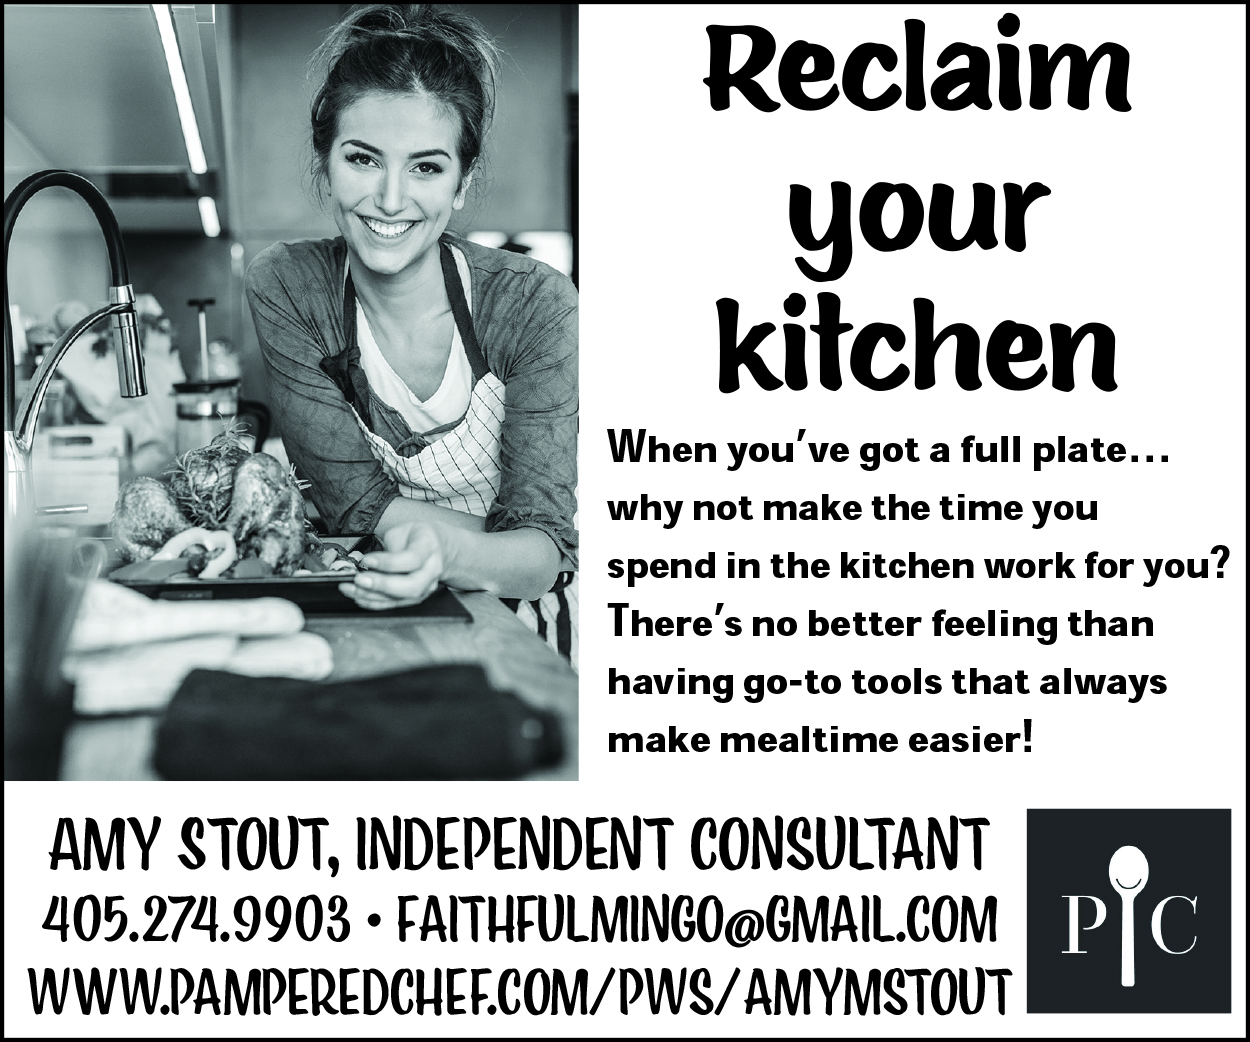 Amy Stout, Independent Pampered Chef Consultant, 405-274-9903